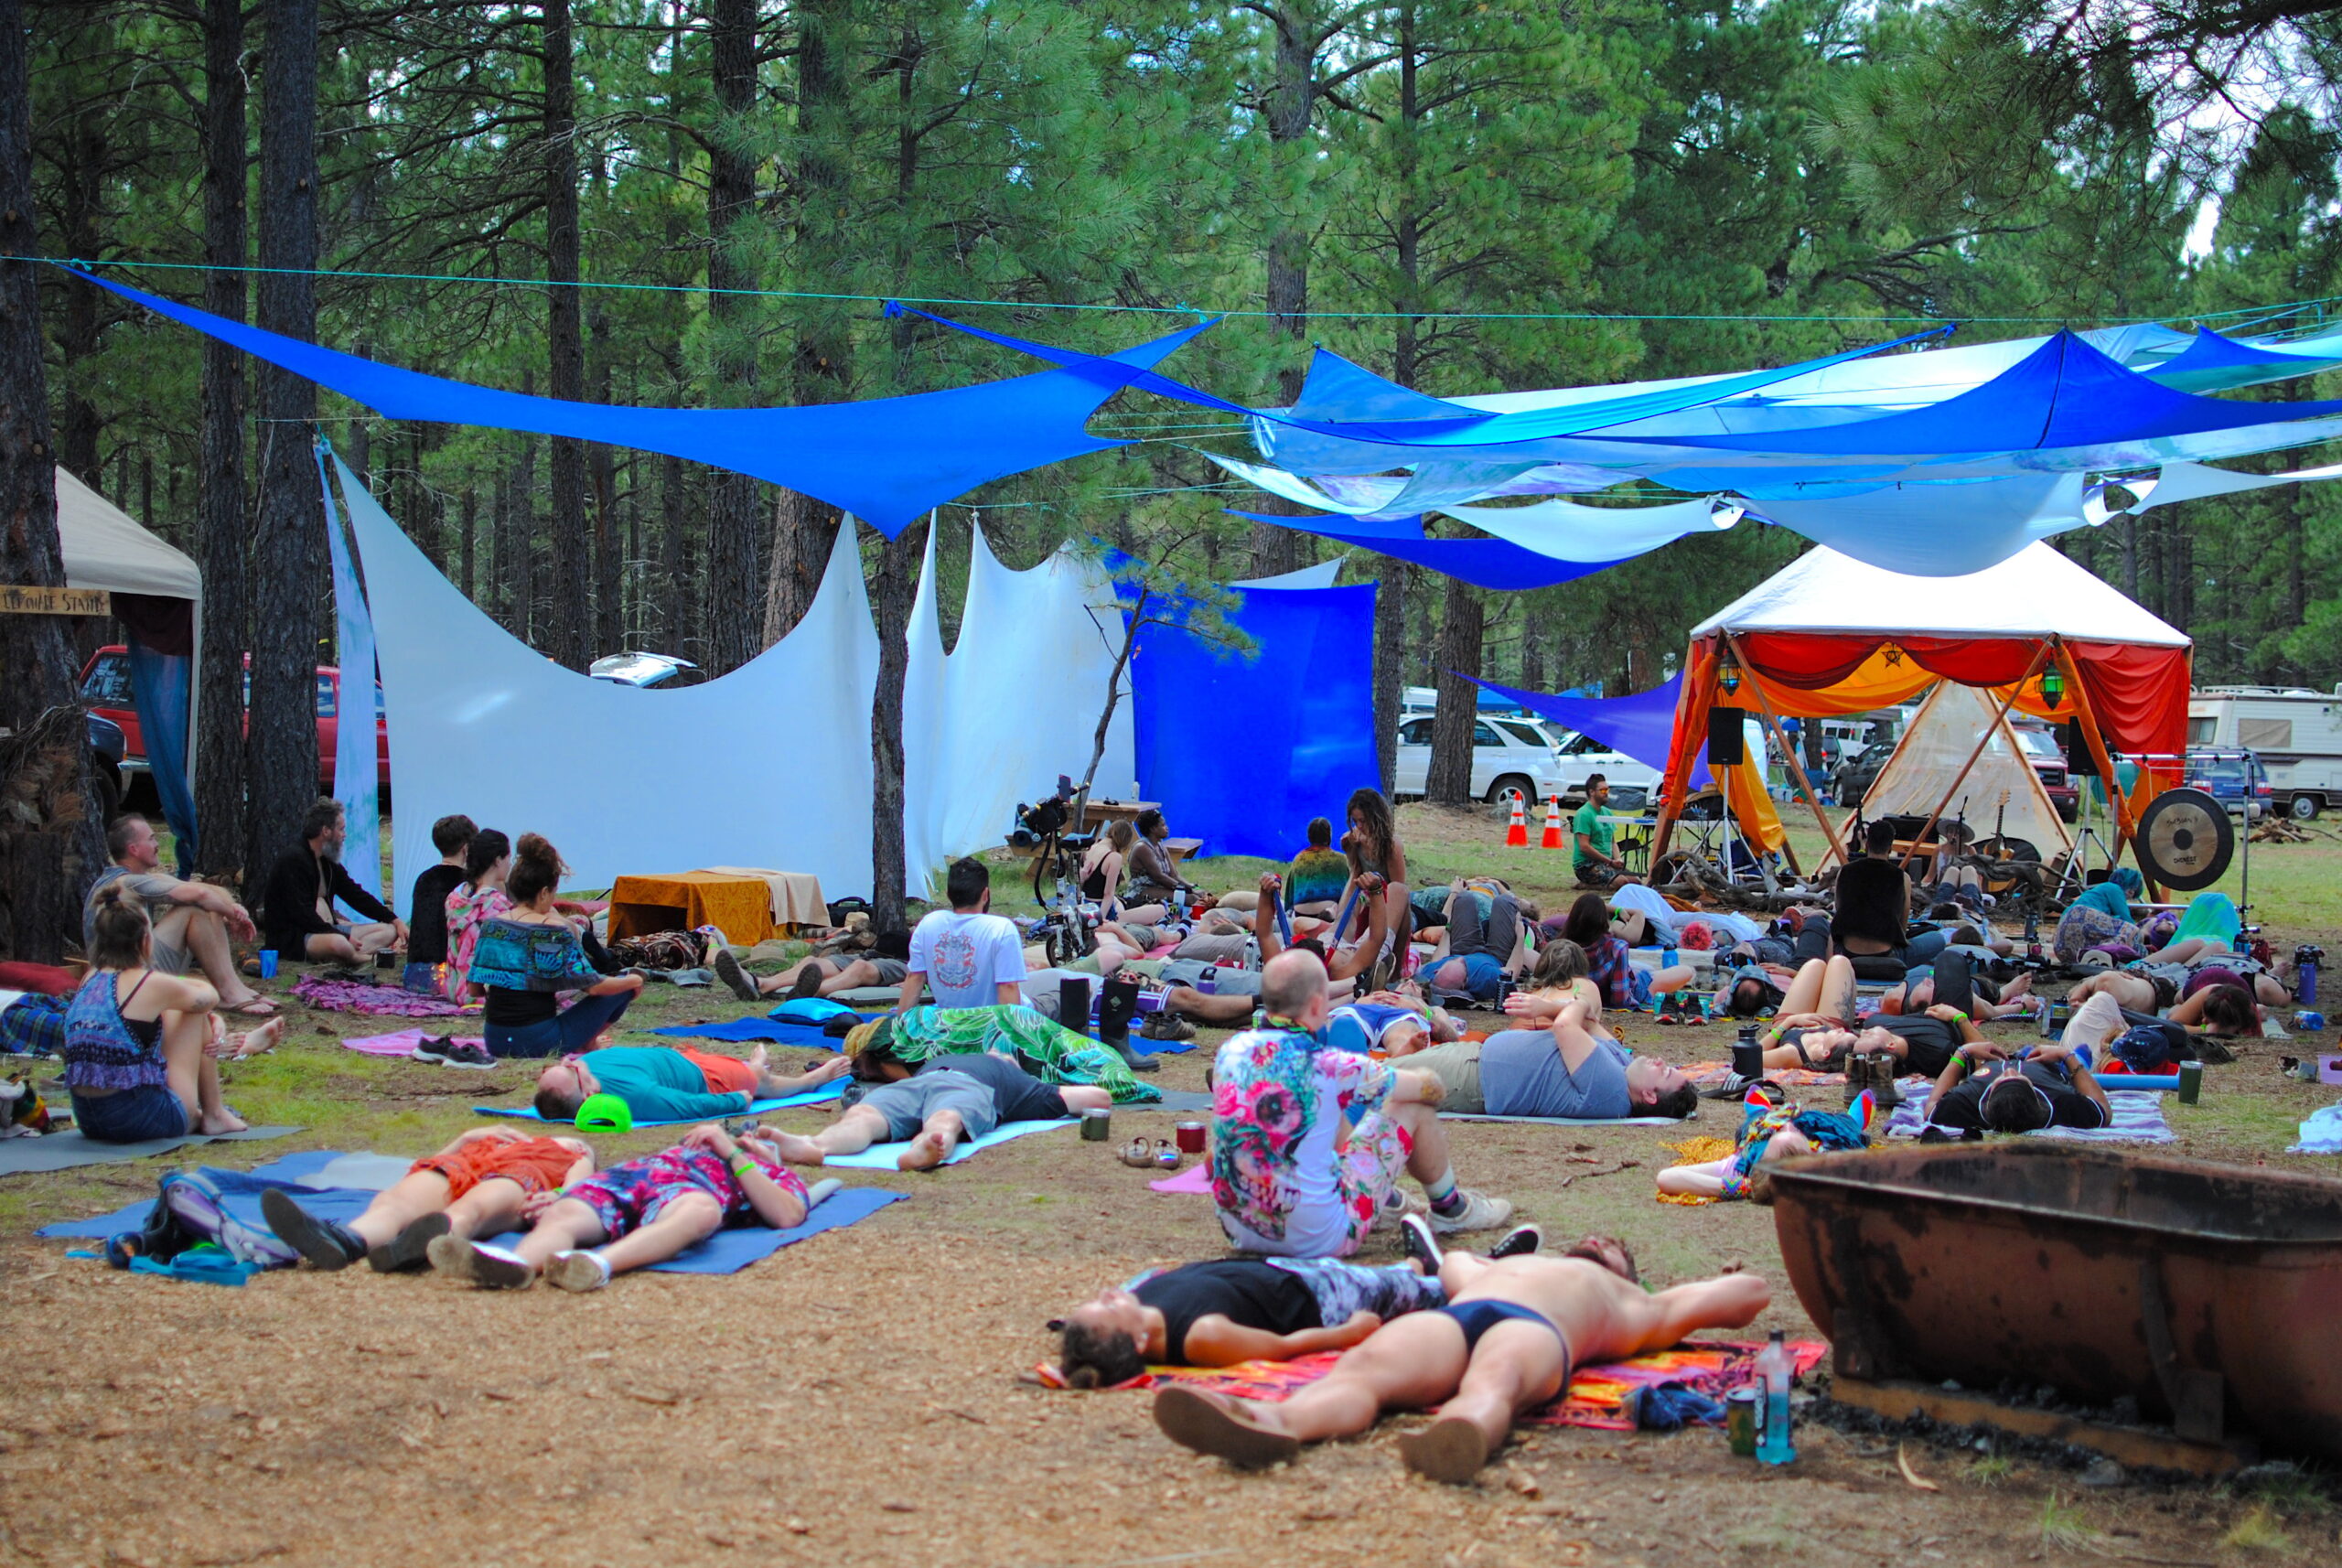 Festival goers relax and soak up the ambient Sound Bath by Rogue Reverie. Photo by: Marissa Novel.